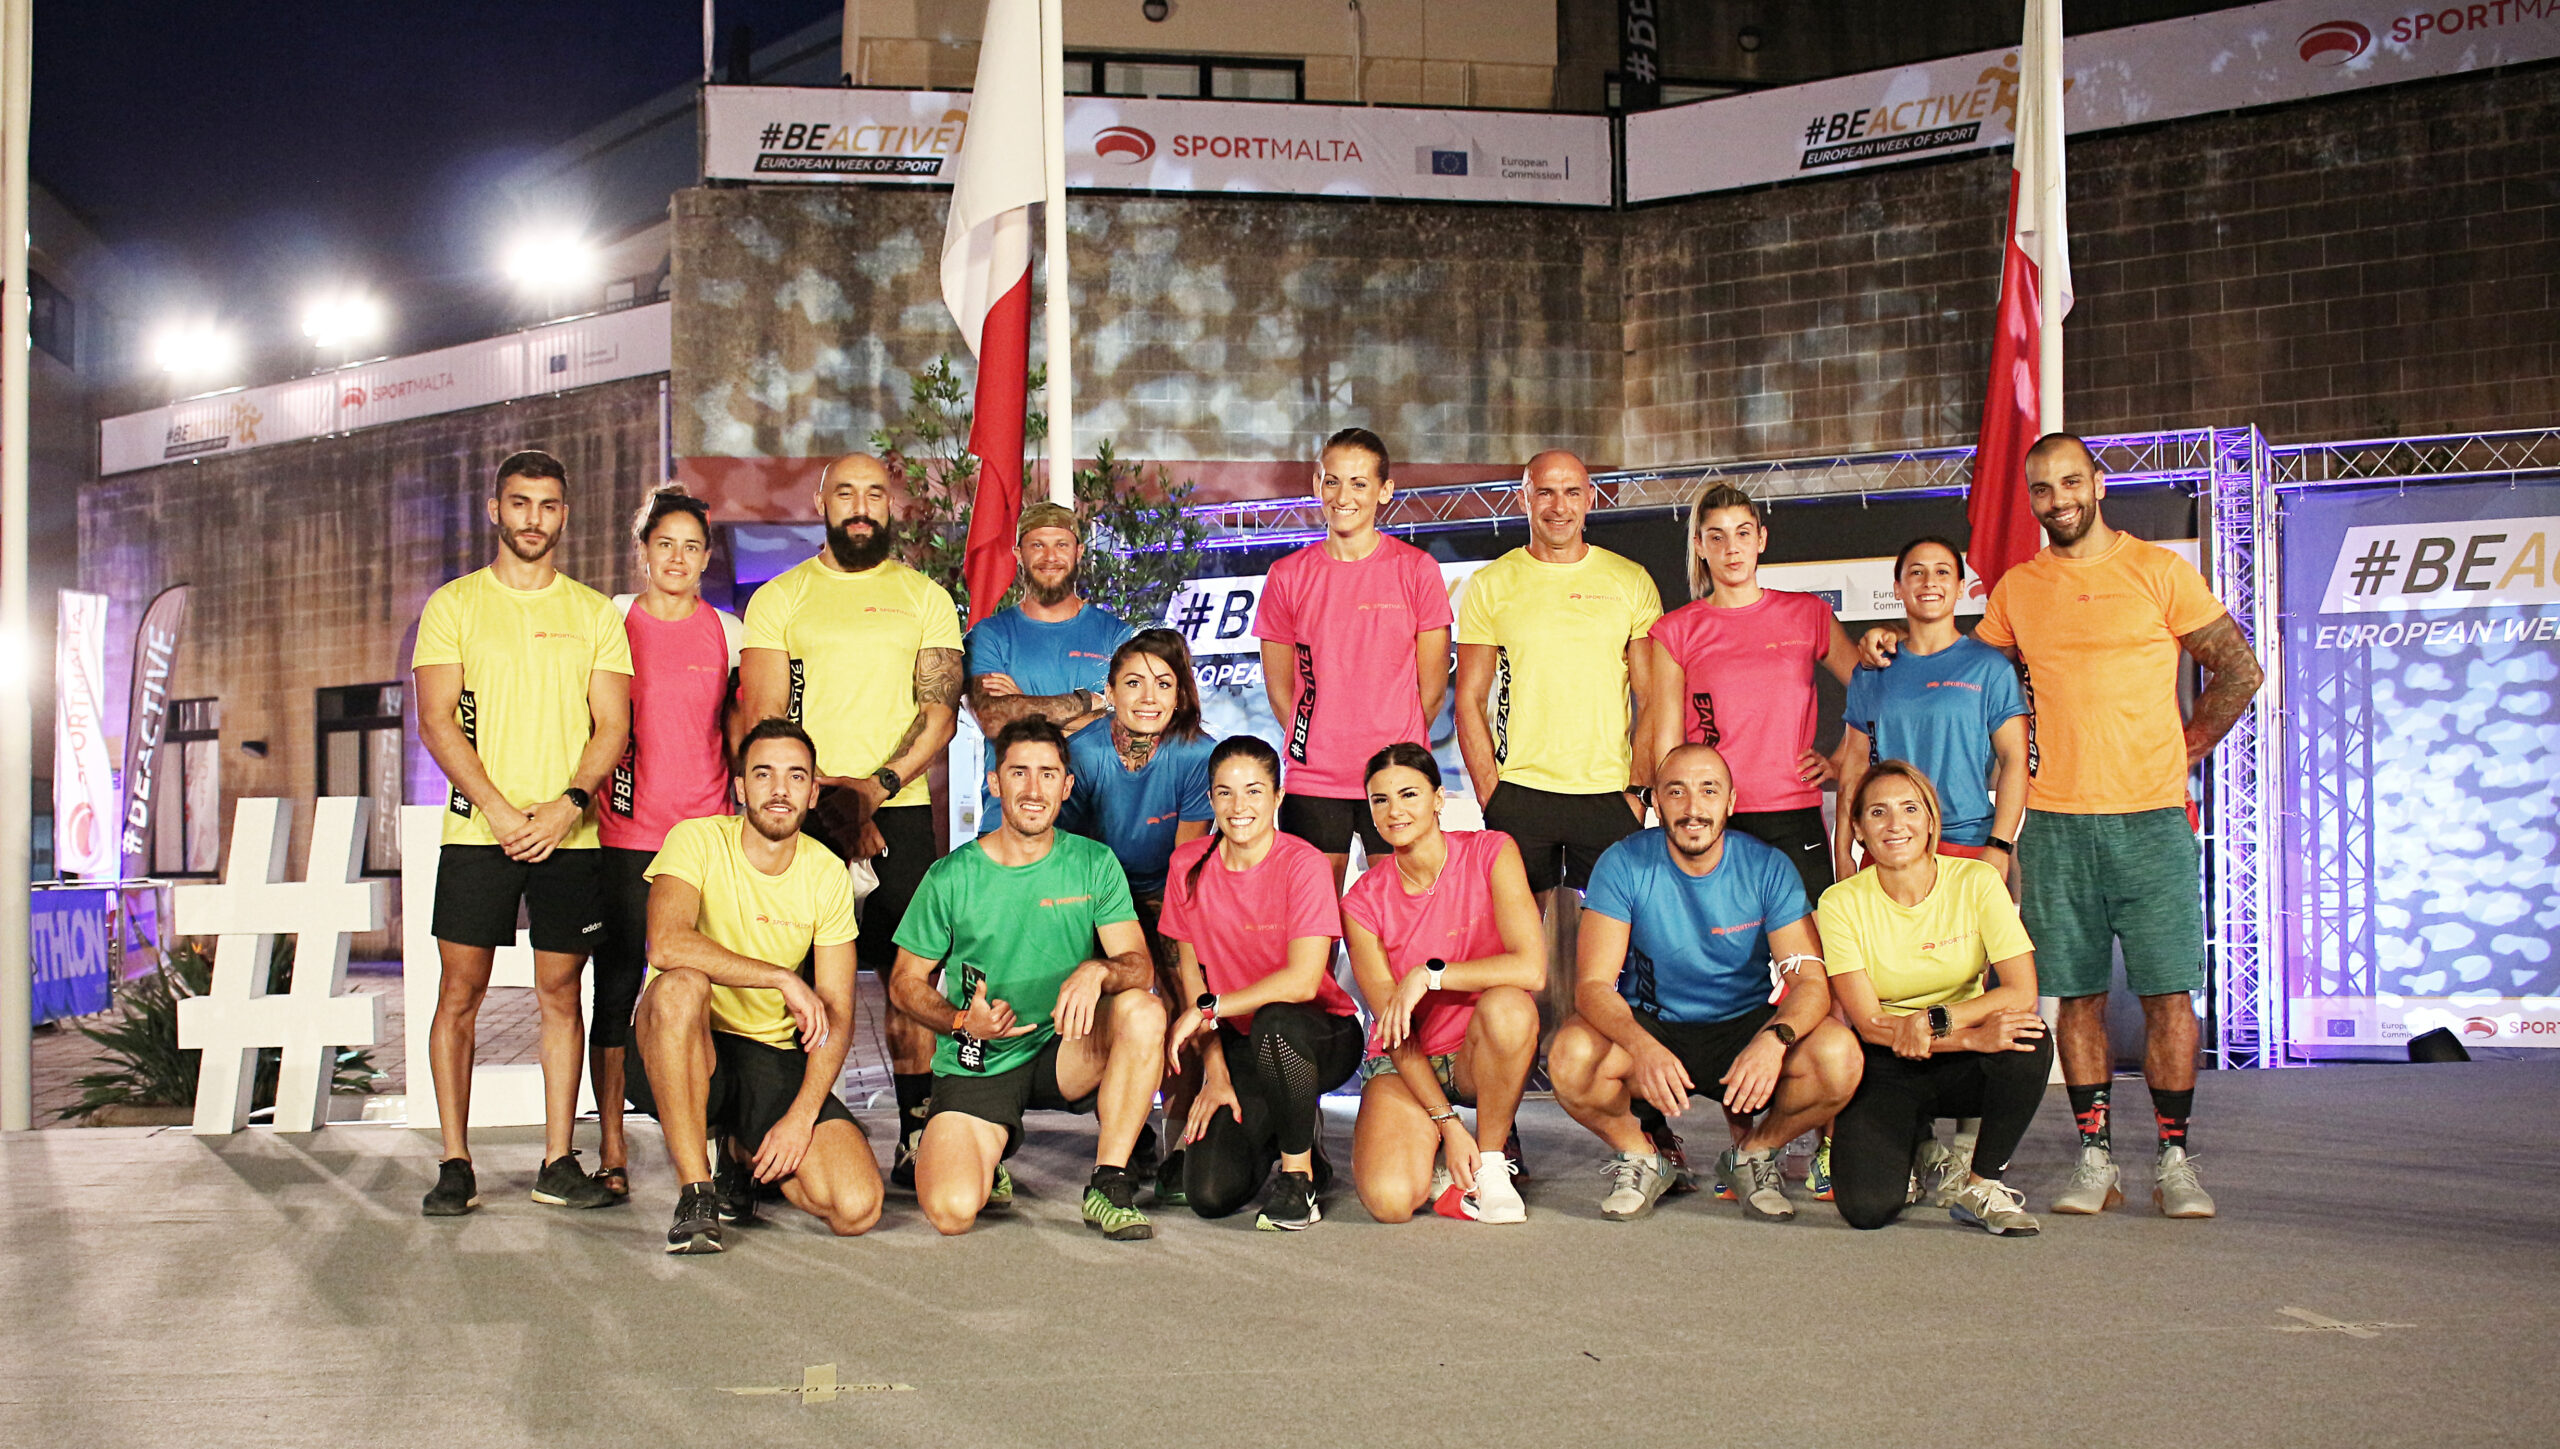 Athletes with Sportmalta promotional training gear posing for a photo together in Be Active campaign